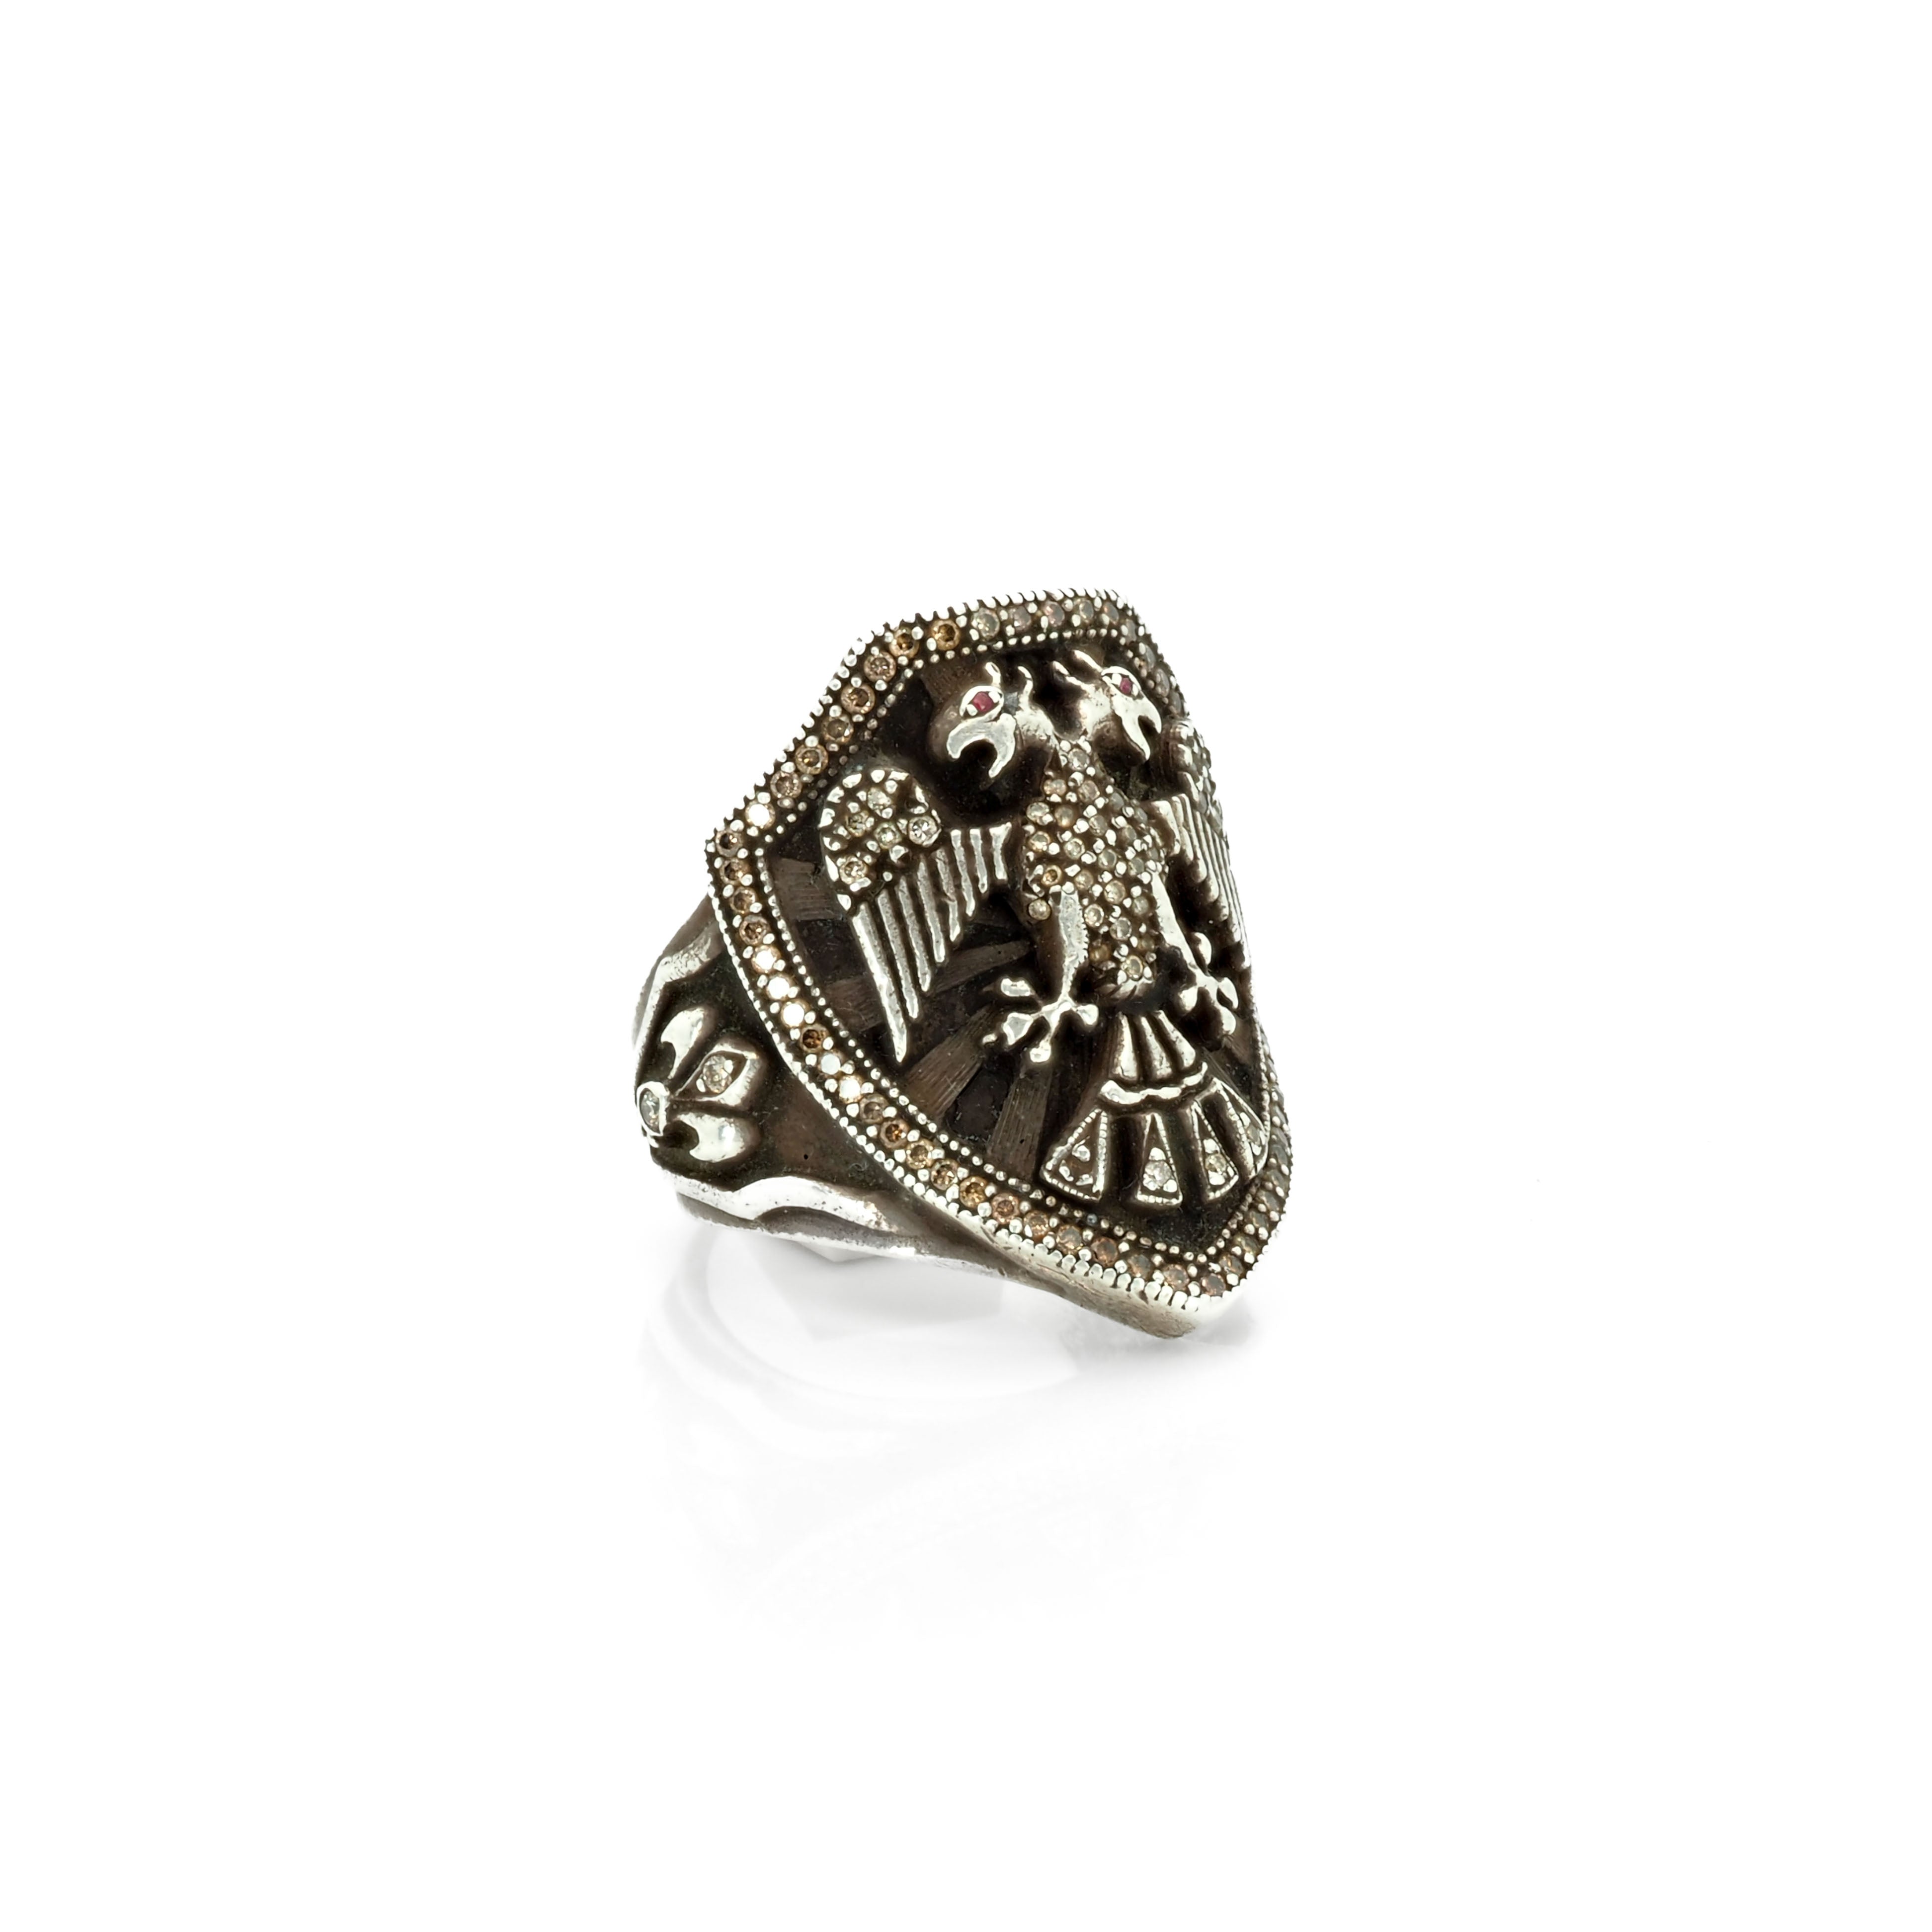 Taru Jewelry Double Headed Eagle and Shield Ring in sterling silver  with brown diamonds.